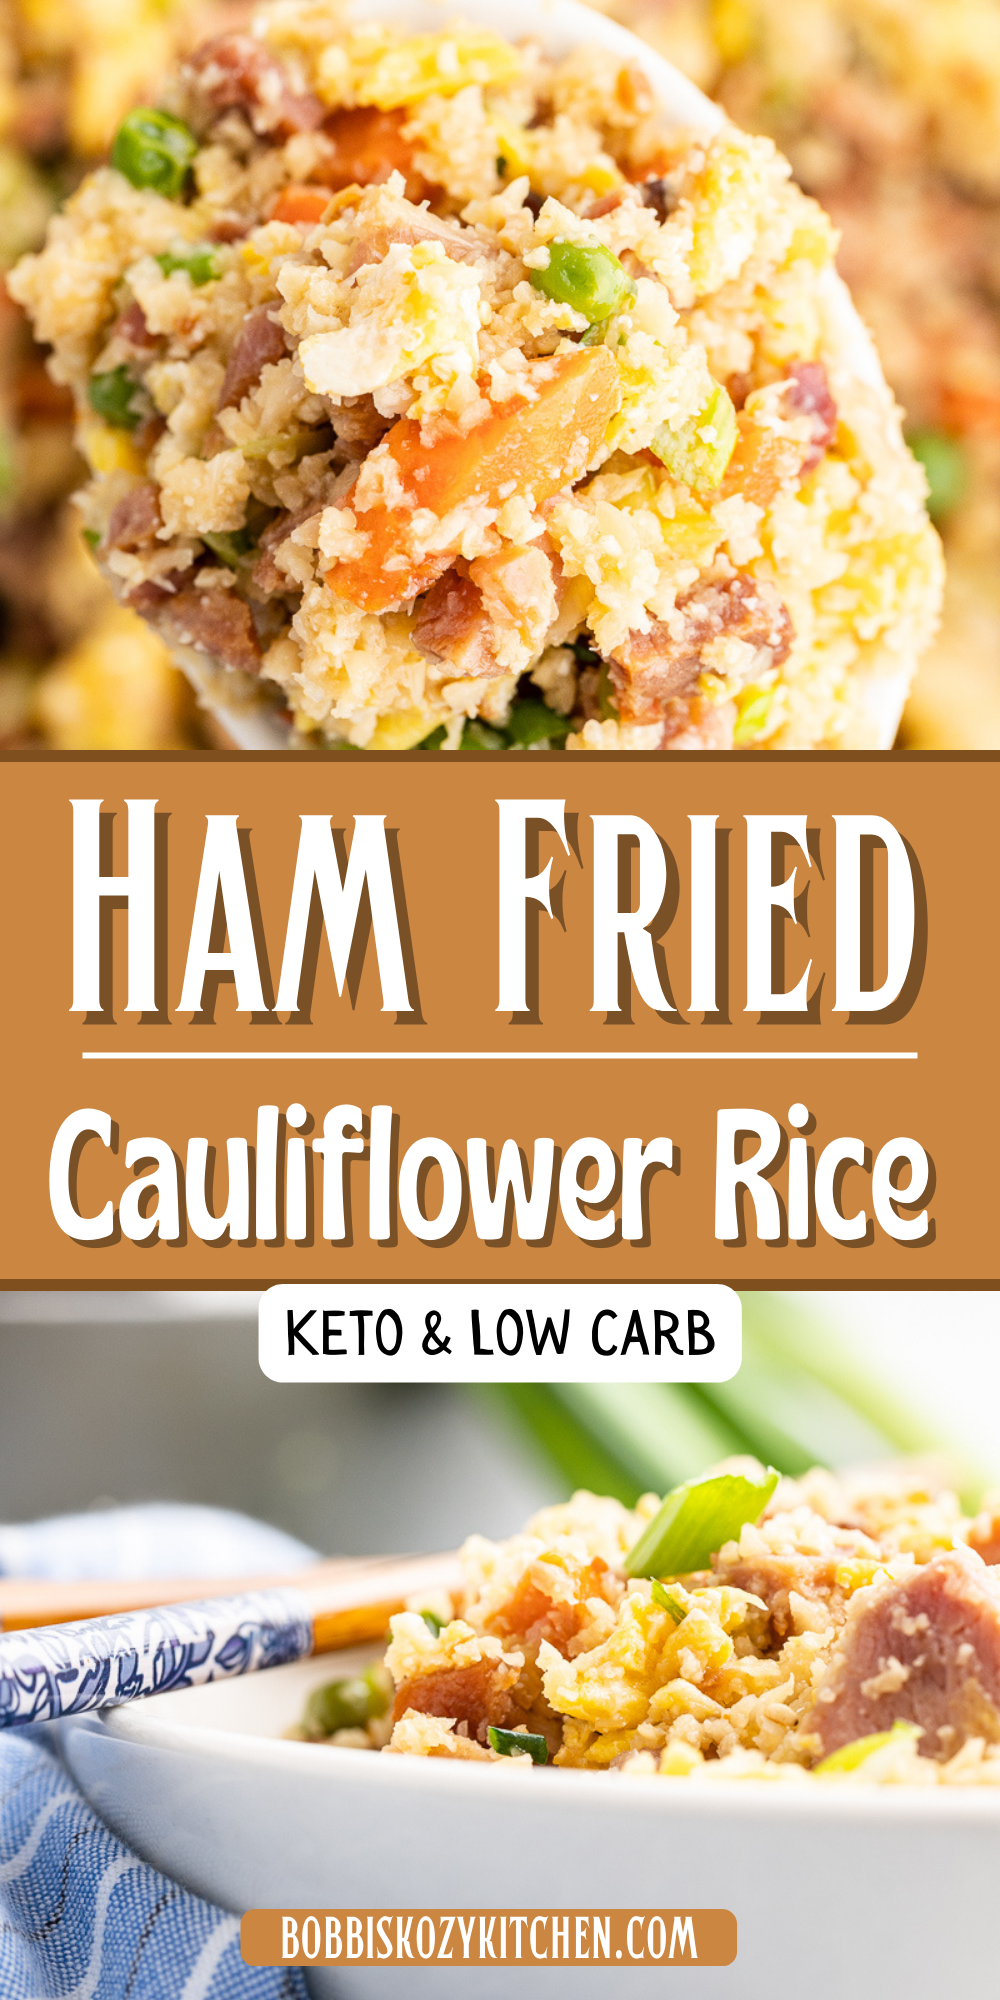 Pinterest graphic with images of ham fried cauliflower rice on it.